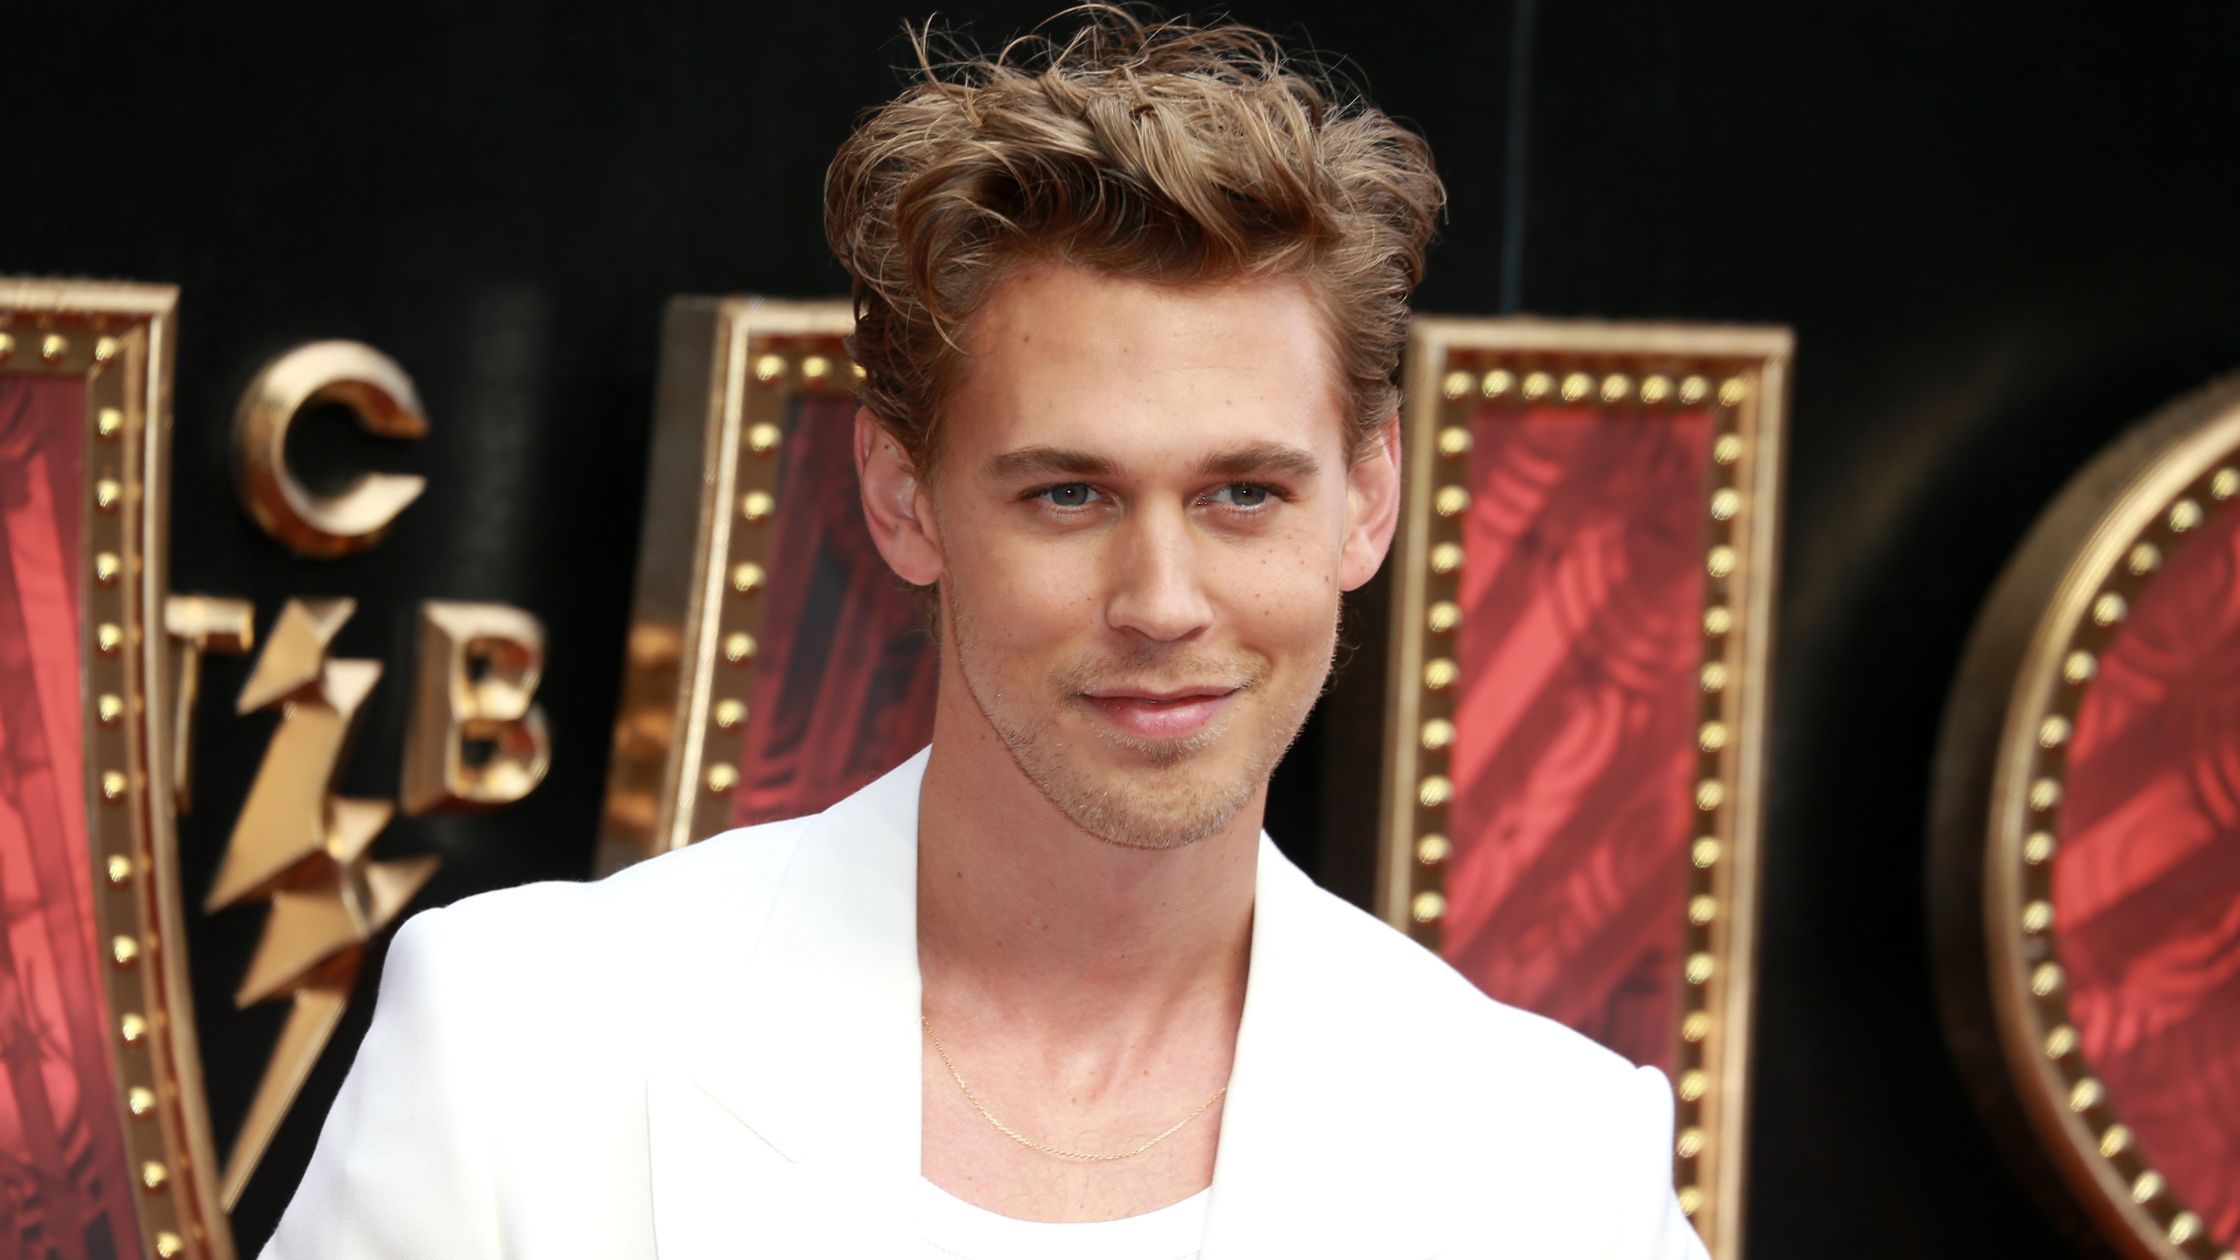 London, United Kingdom - May 31, 2022: Austin Butler attends the "Elvis" UK Special Screening at BFI Southbank in London, England. (Fred Duval / Shutterstock.com)